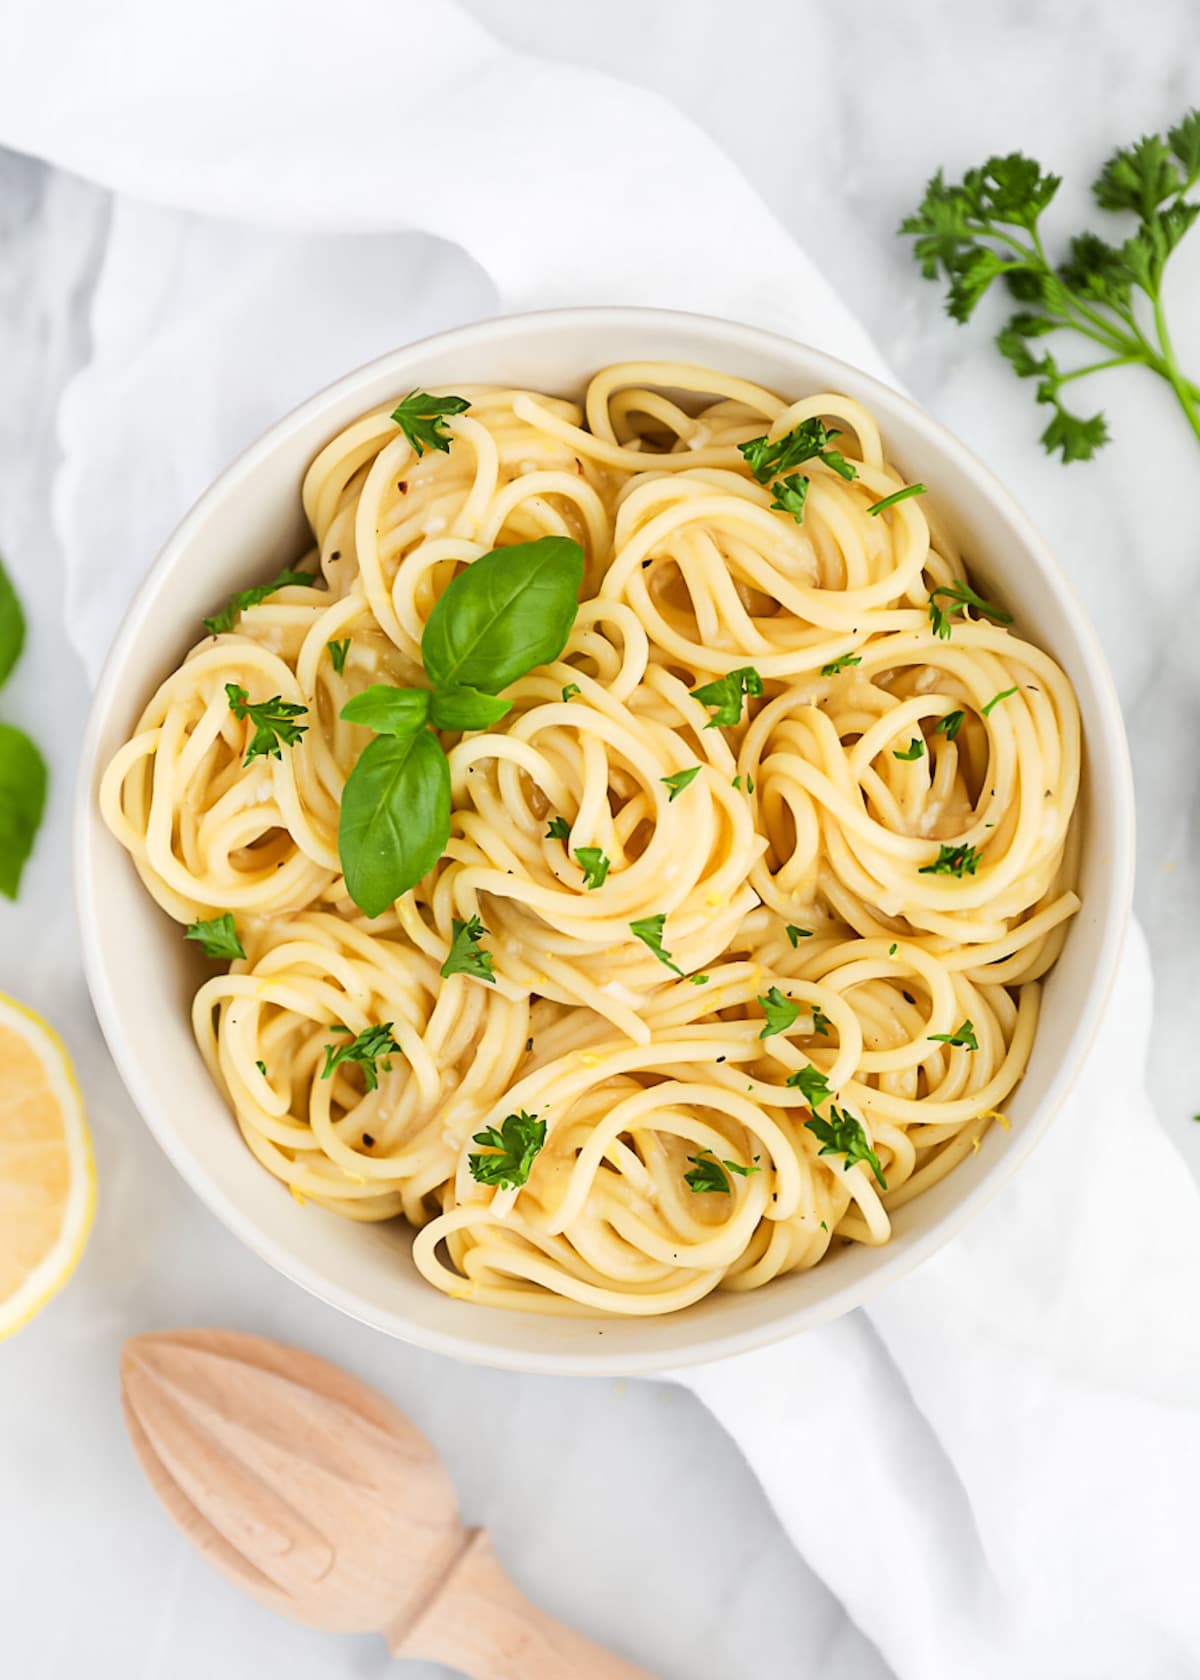 Pasta that has been tossed in a lemon sauce. Garnished with fresh green herbs.